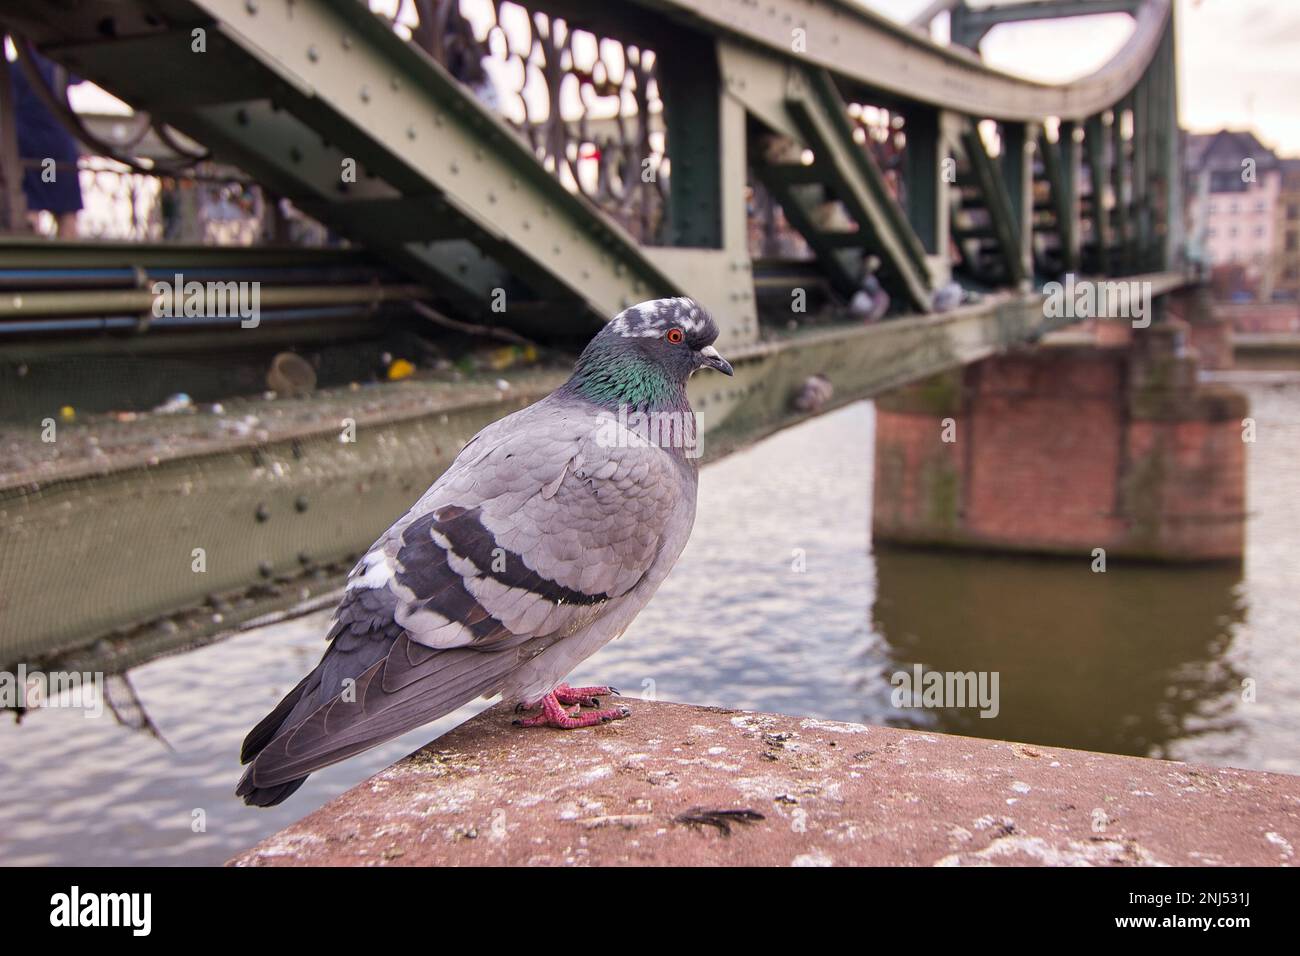 Full body shot of a pigeon sitting on a column with a bridge in the background. Stock Photo